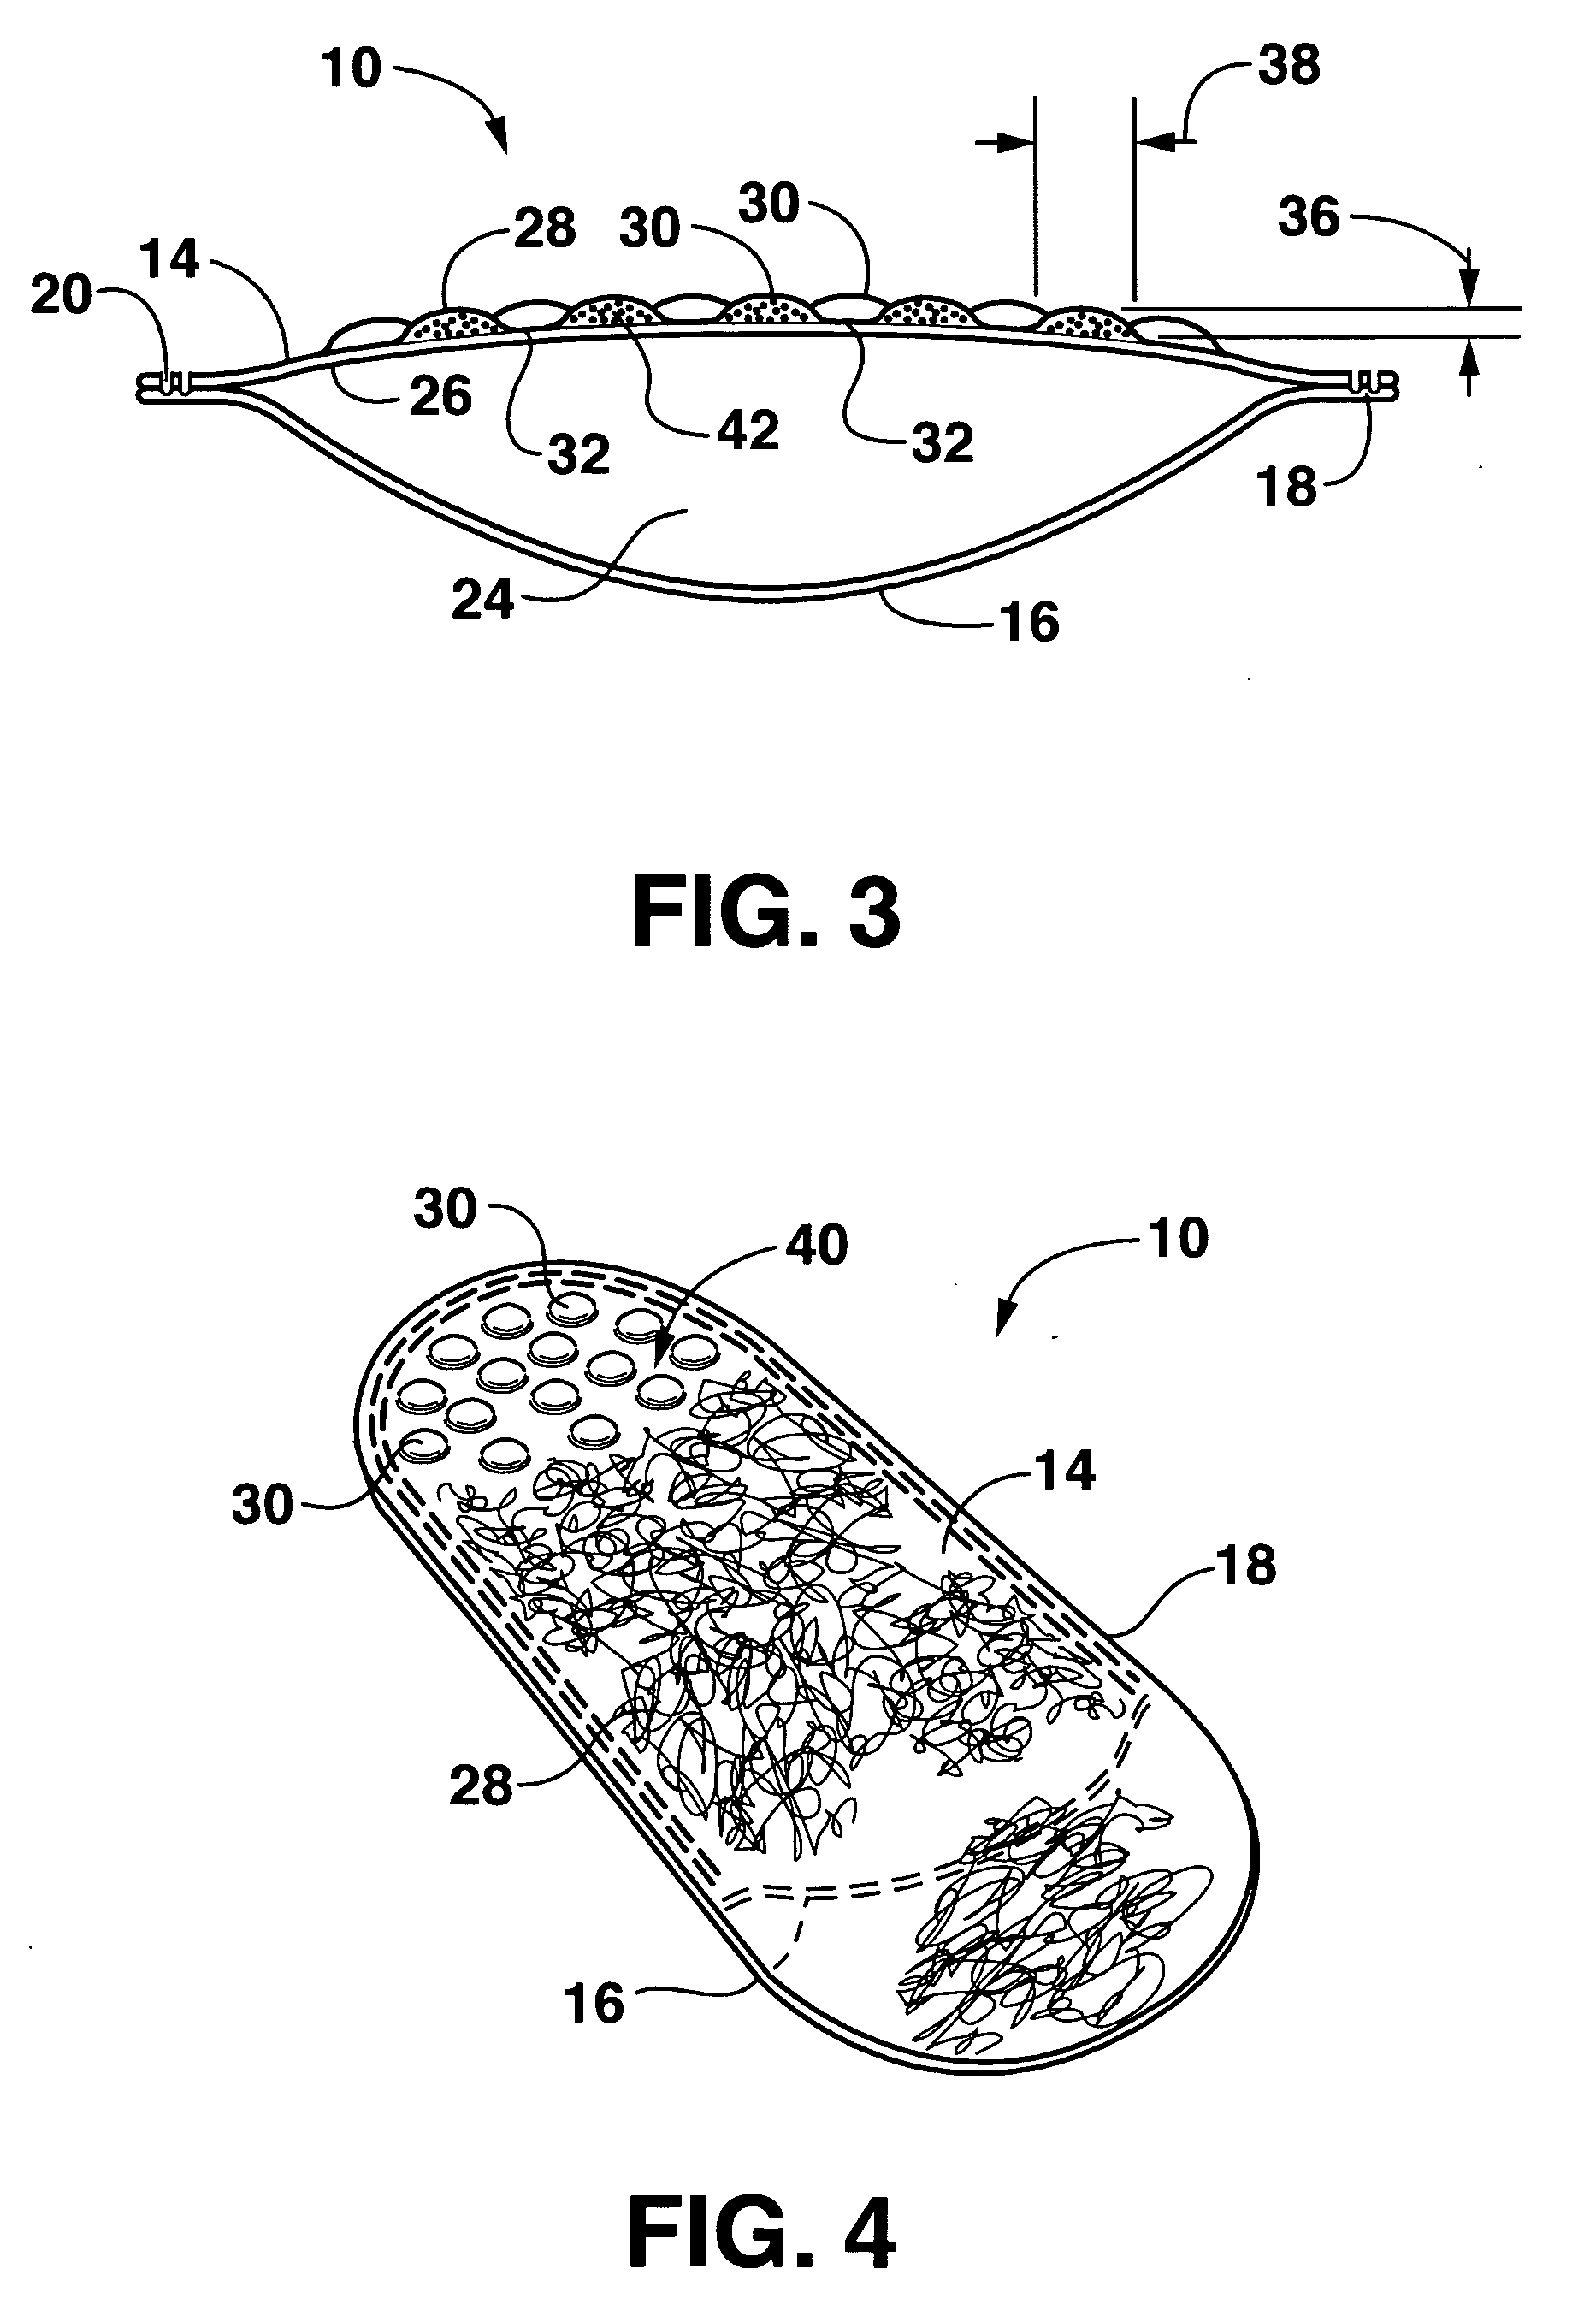 Applicator with discrete pockets of a composition to be delivered with use of the applicator